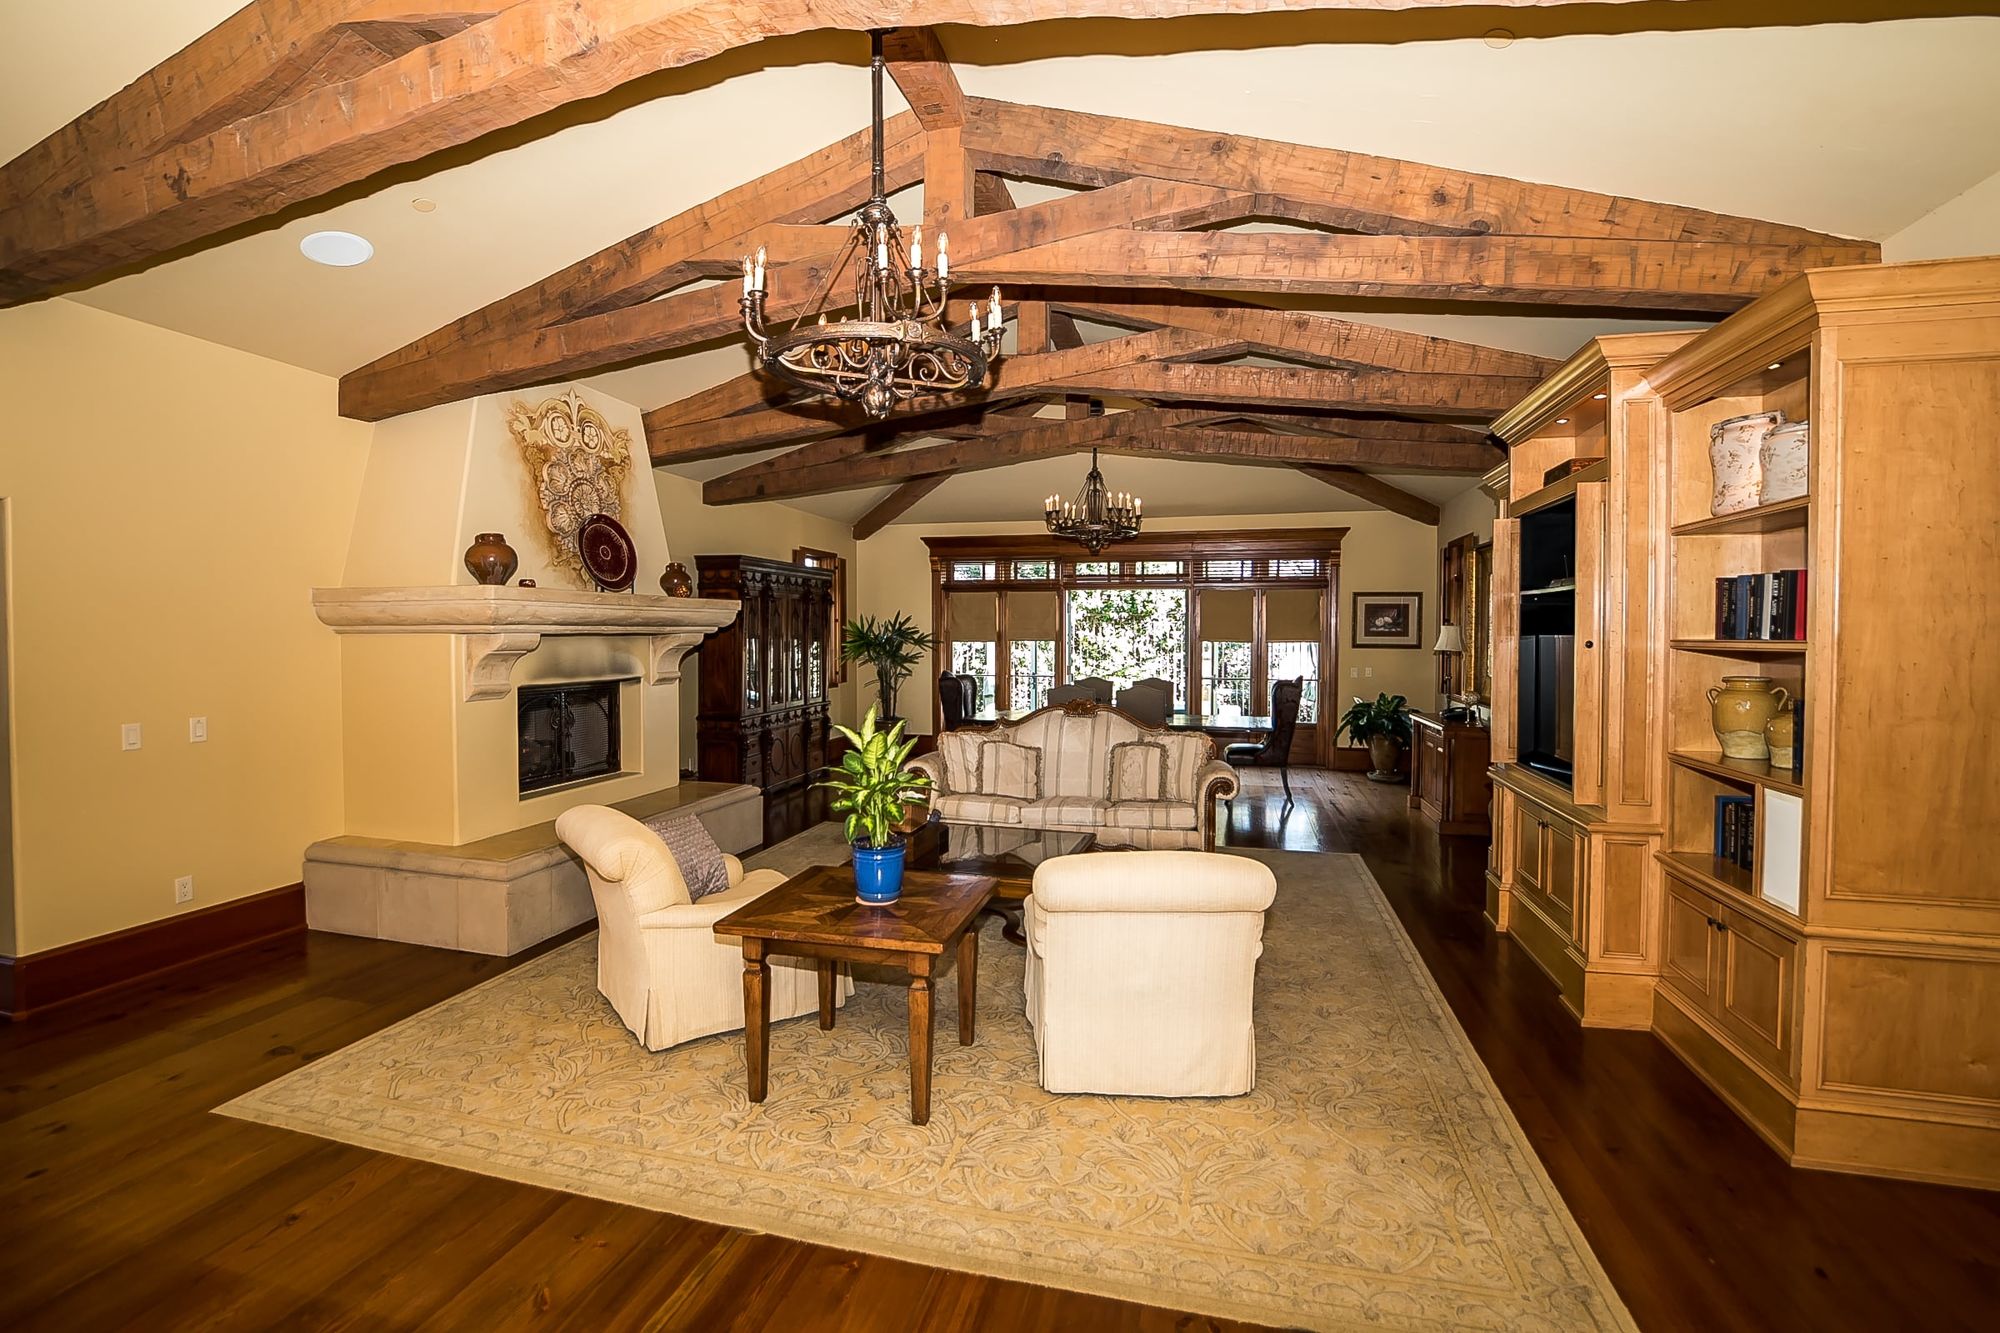 Sitting room with decorative fireplace, television cabinet, chandeliers suspended from the ceiling with rafters